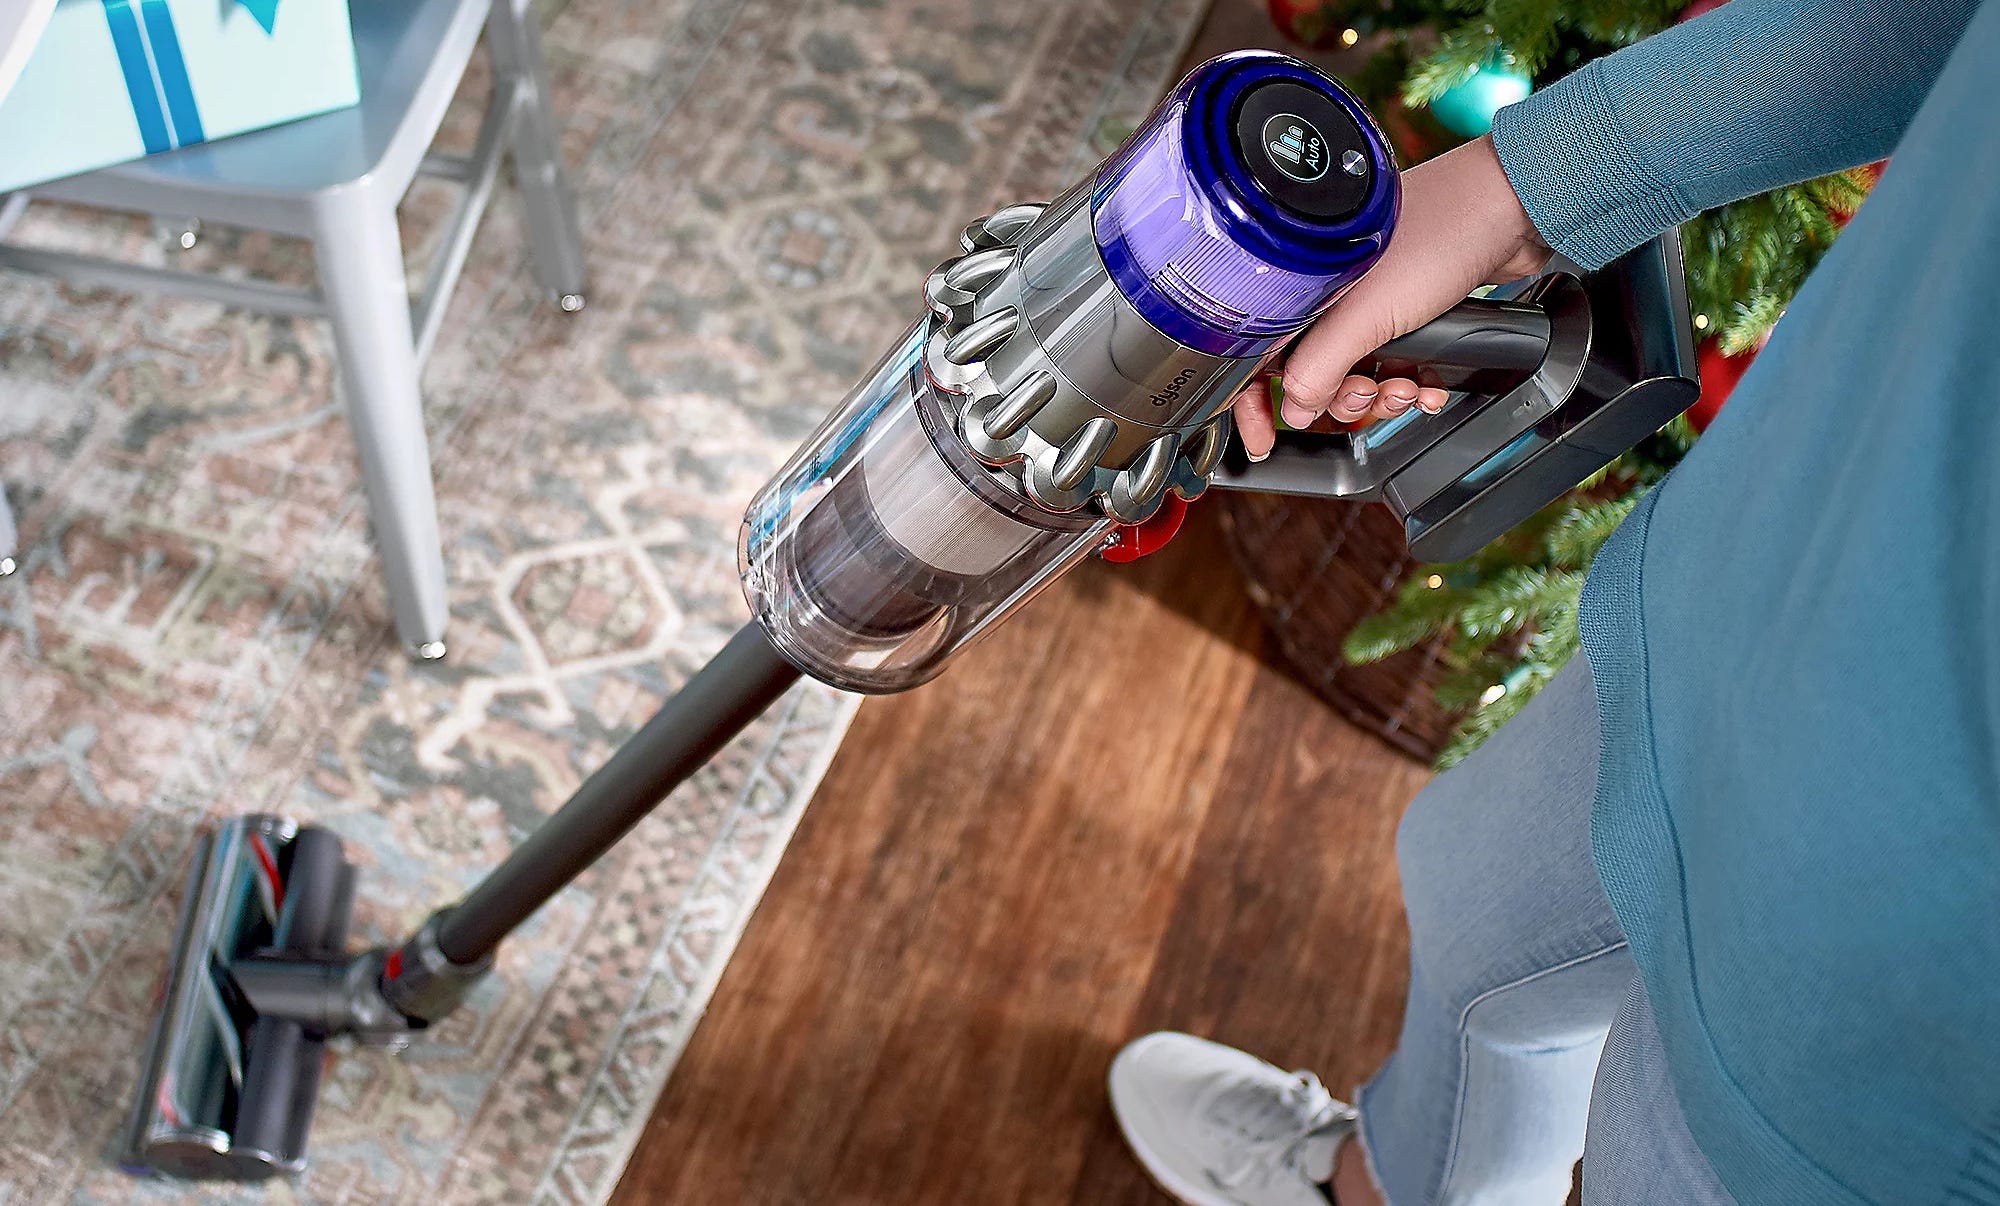 vis Stout Onschuldig Prime Day 2021: The Dyson V11 Torque Drive cordless vacuum is on sale now